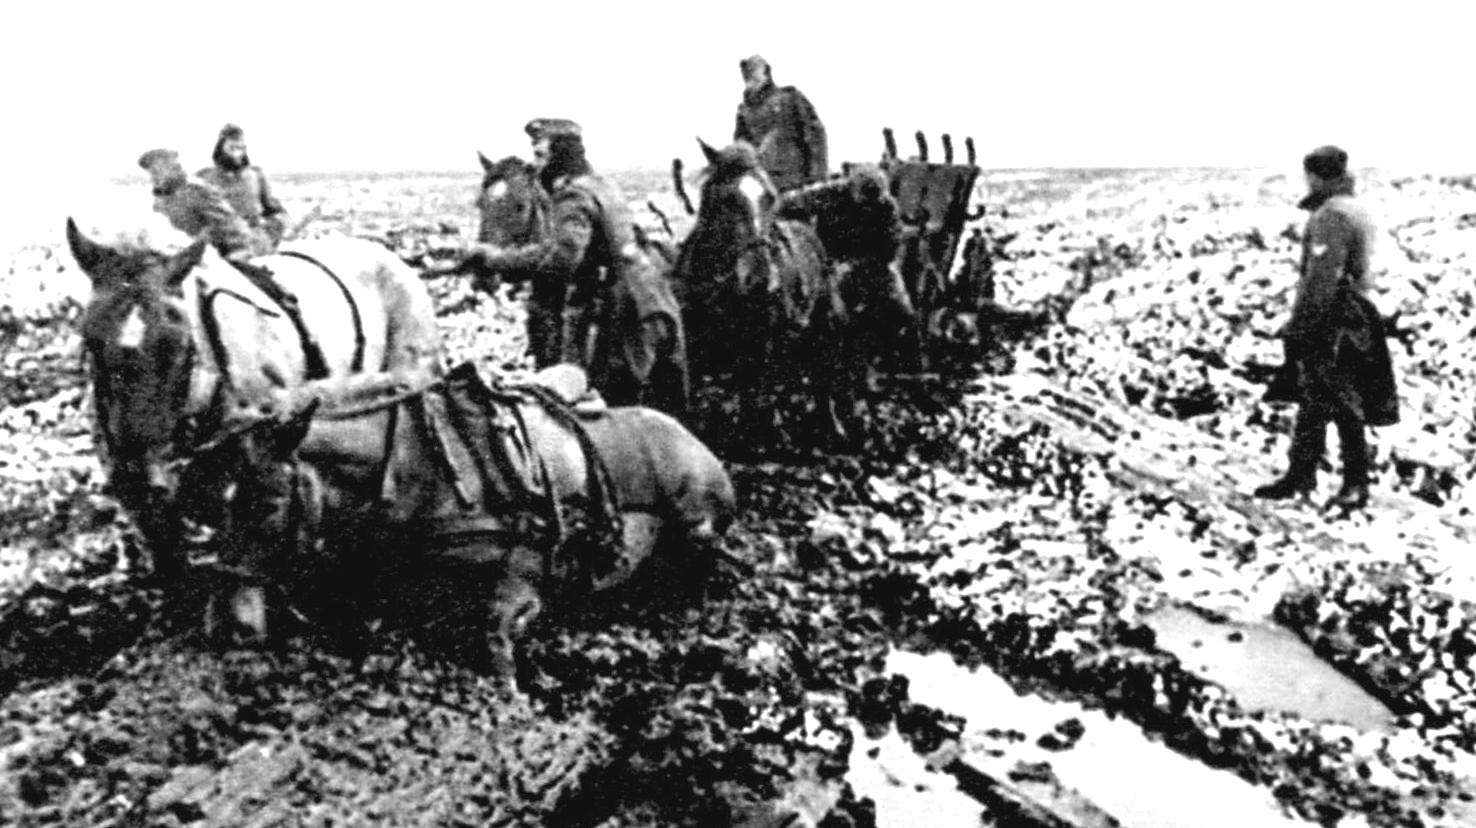 HORSES AND TRACTORS IN THE WEHRMACHT